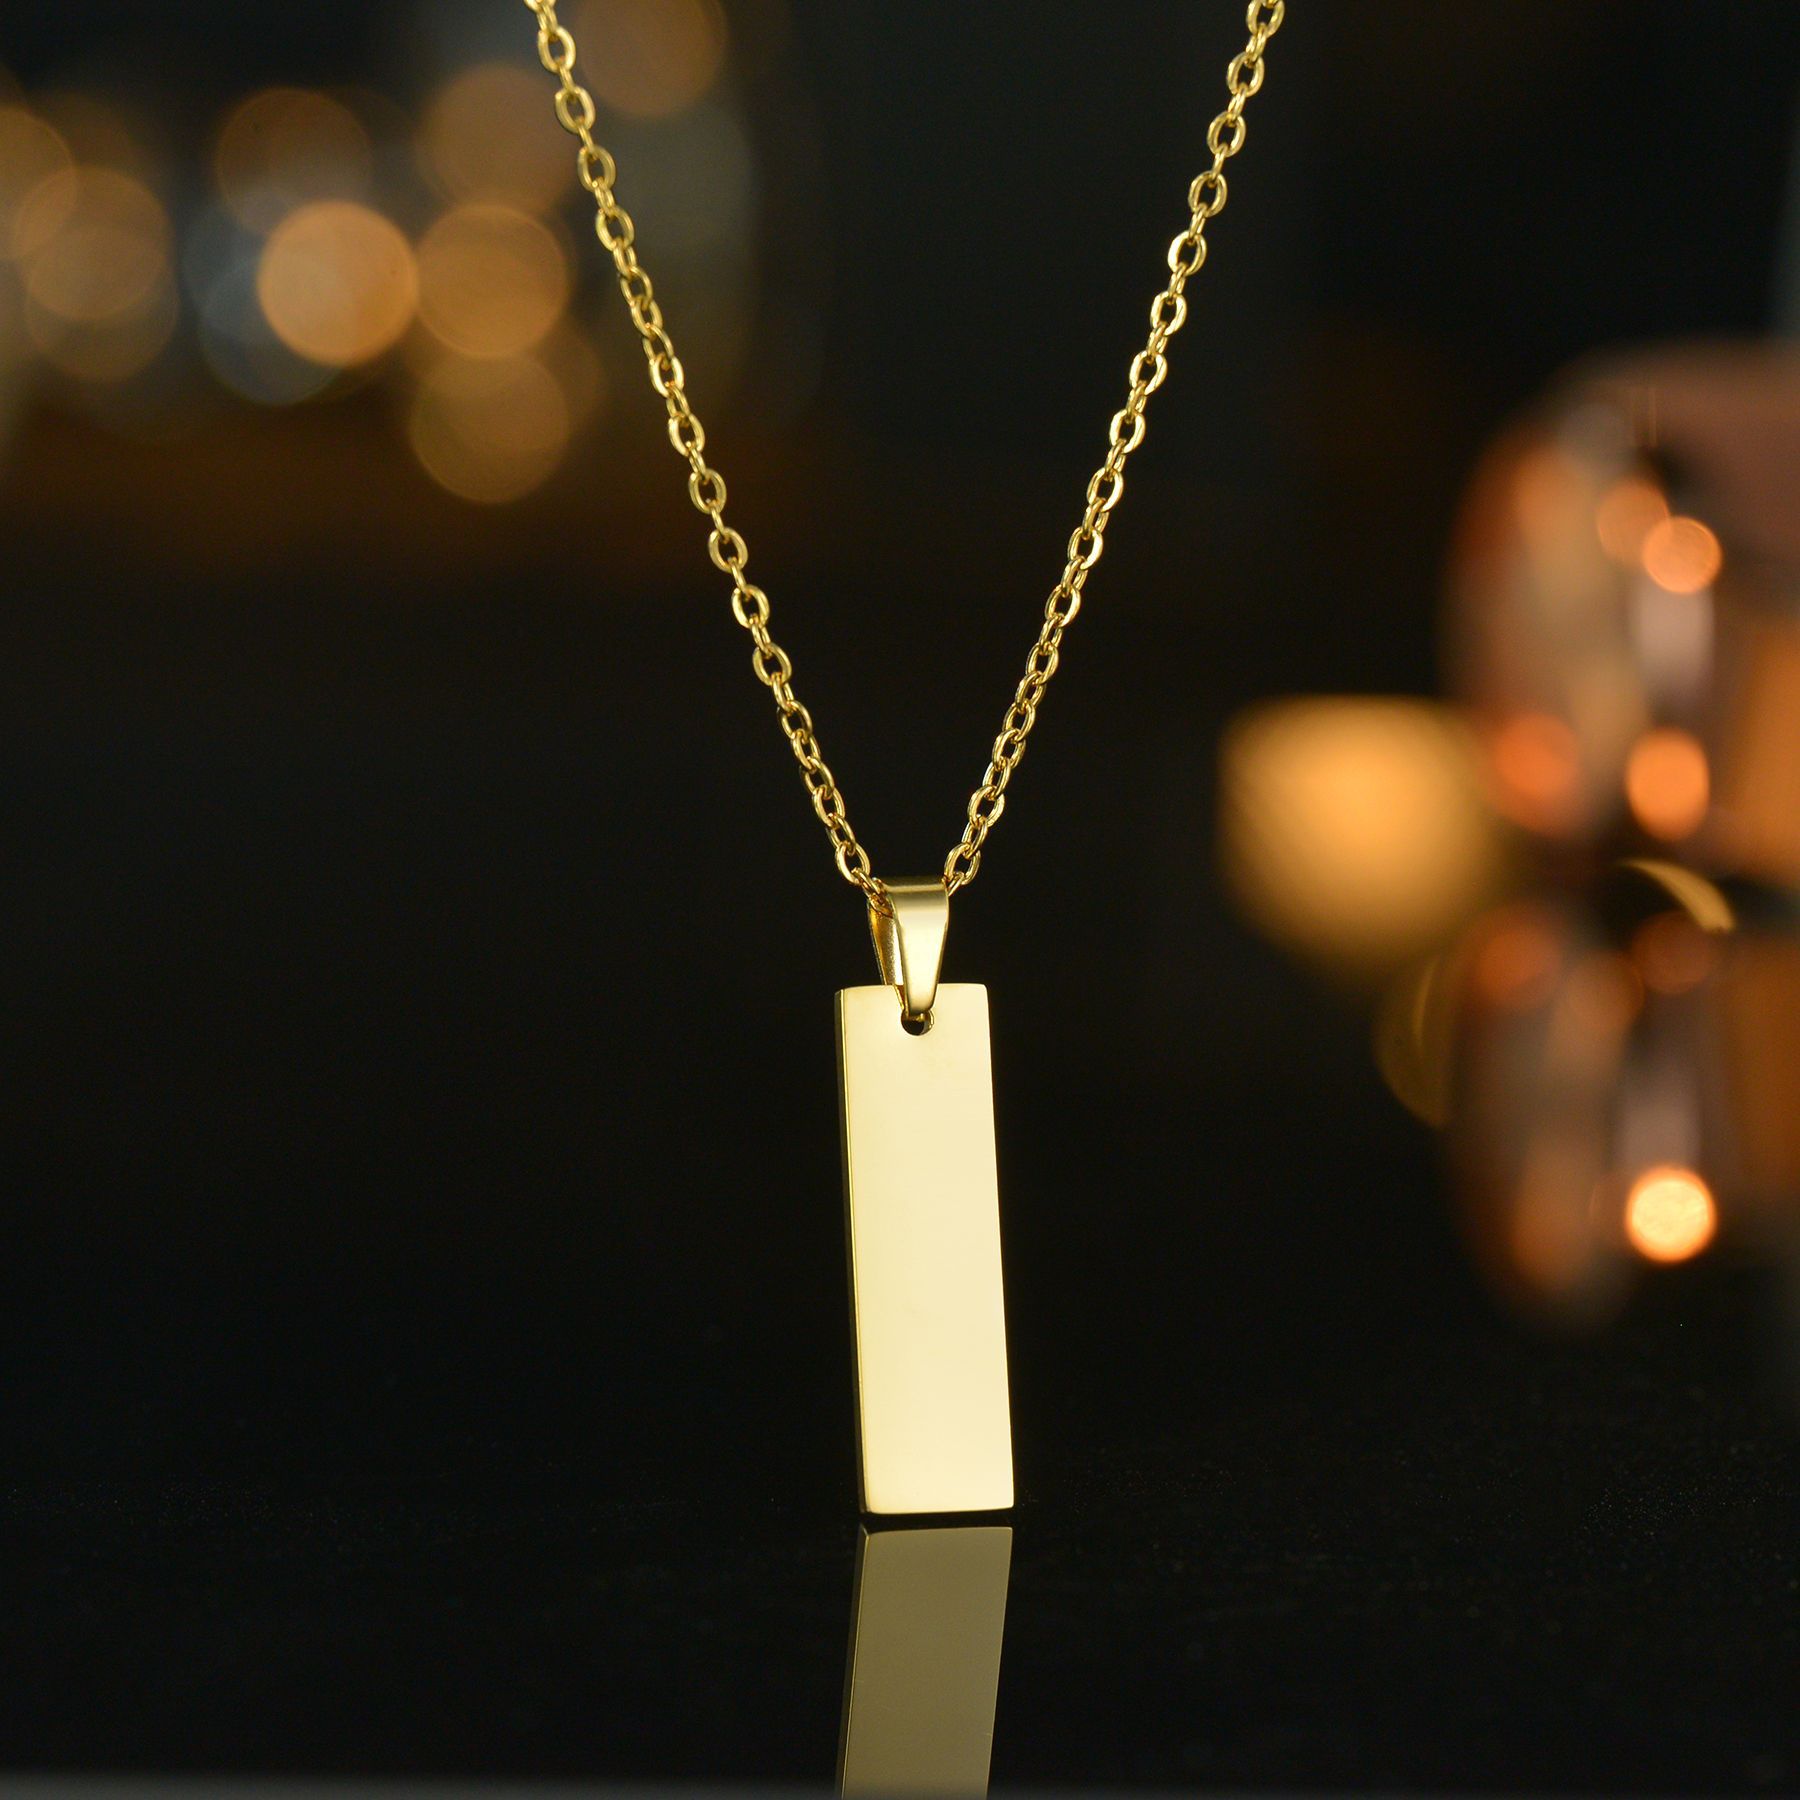 Lady - Gold necklace